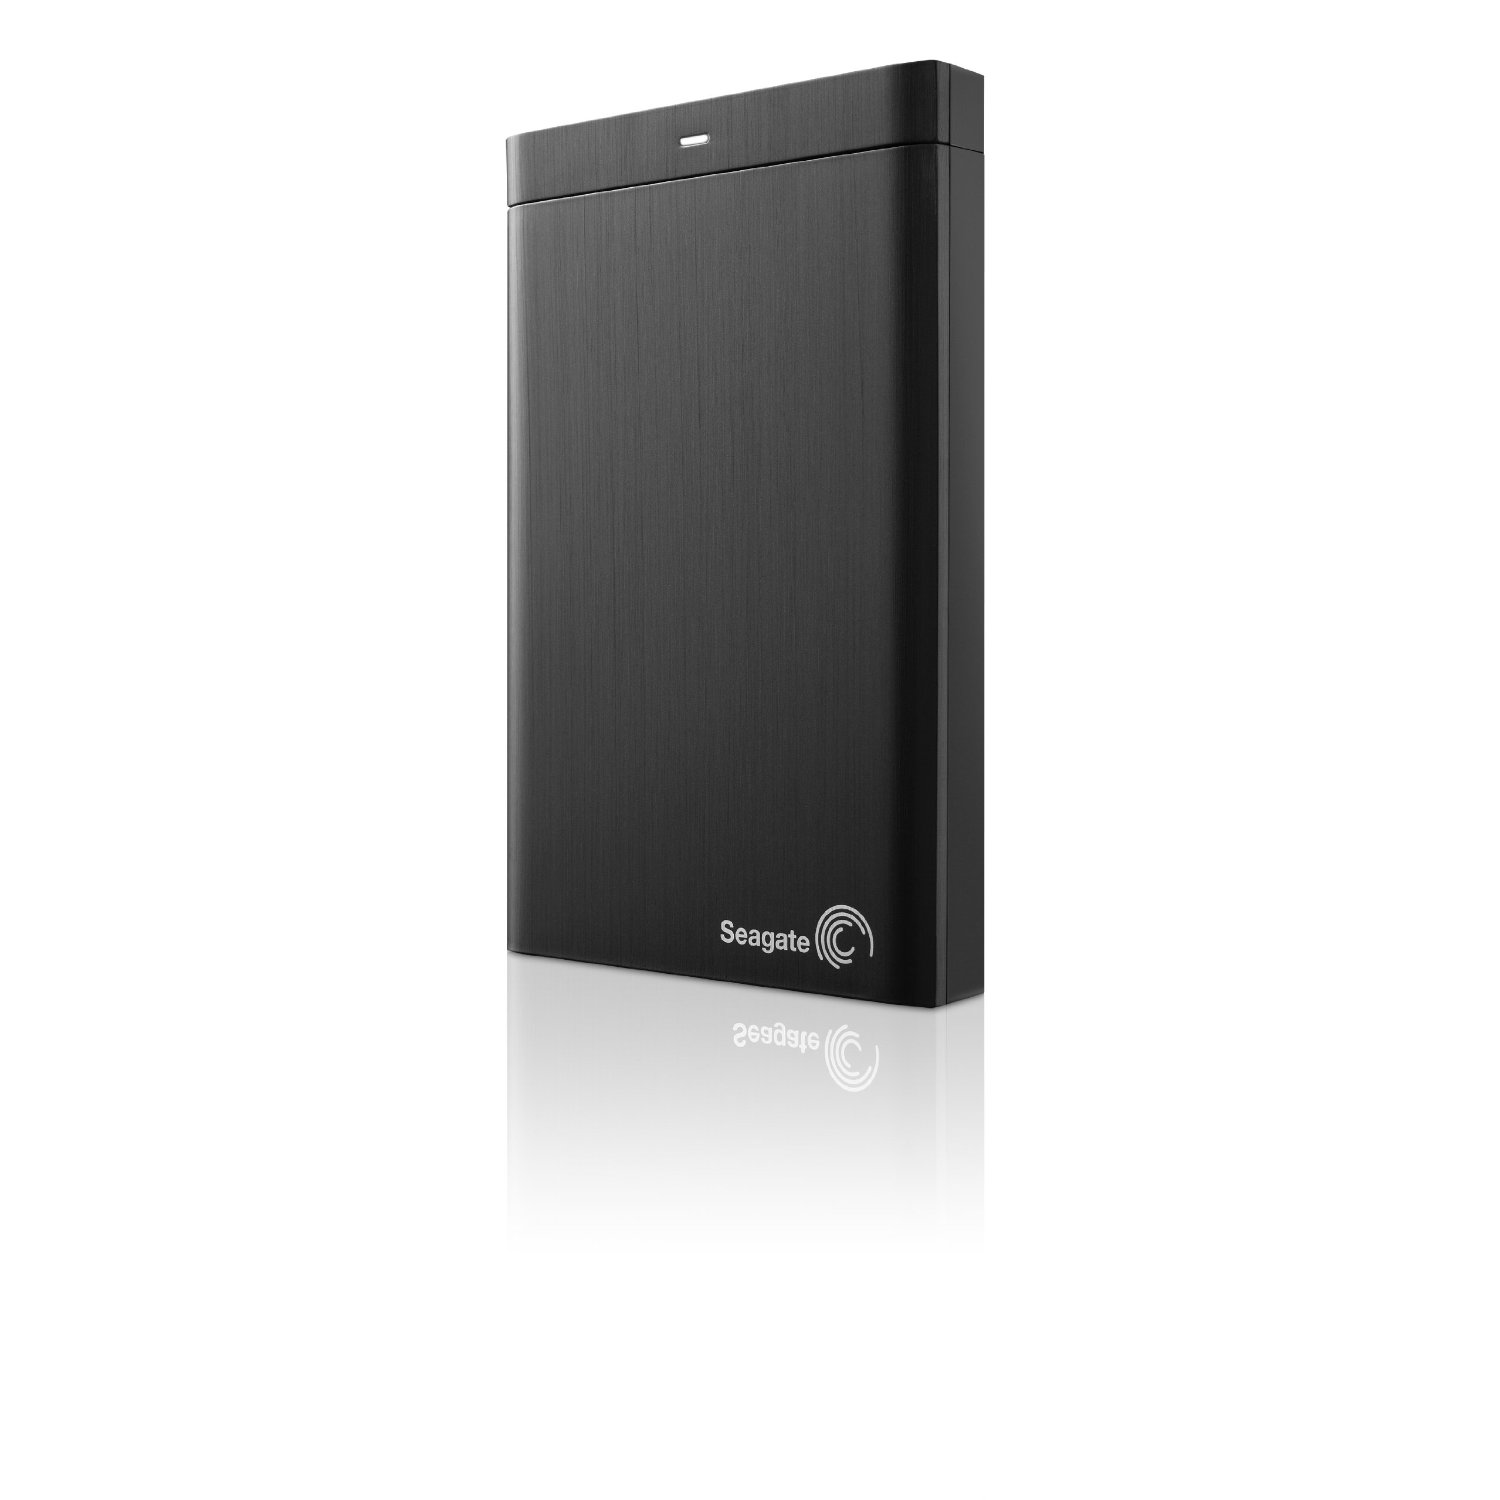 http://thetechjournal.com/wp-content/uploads/images/1206/1340438434-seagate-backup-plus-1-terabyte-portable-hard-drive-for-109-7.jpg